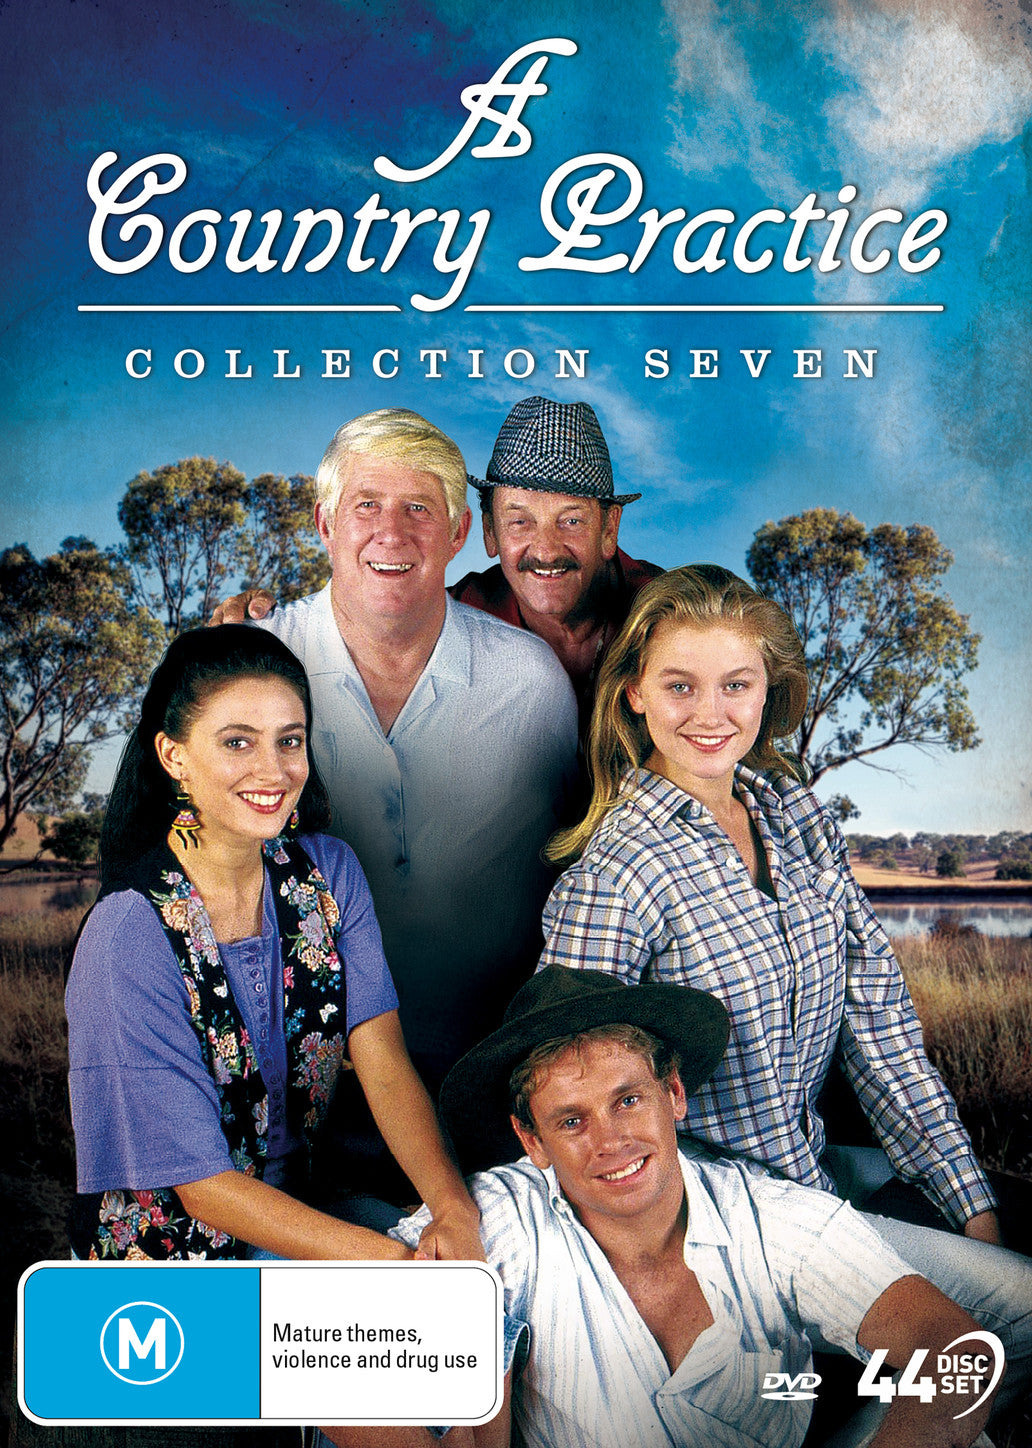 A COUNTRY PRACTICE - COLLECTION 7